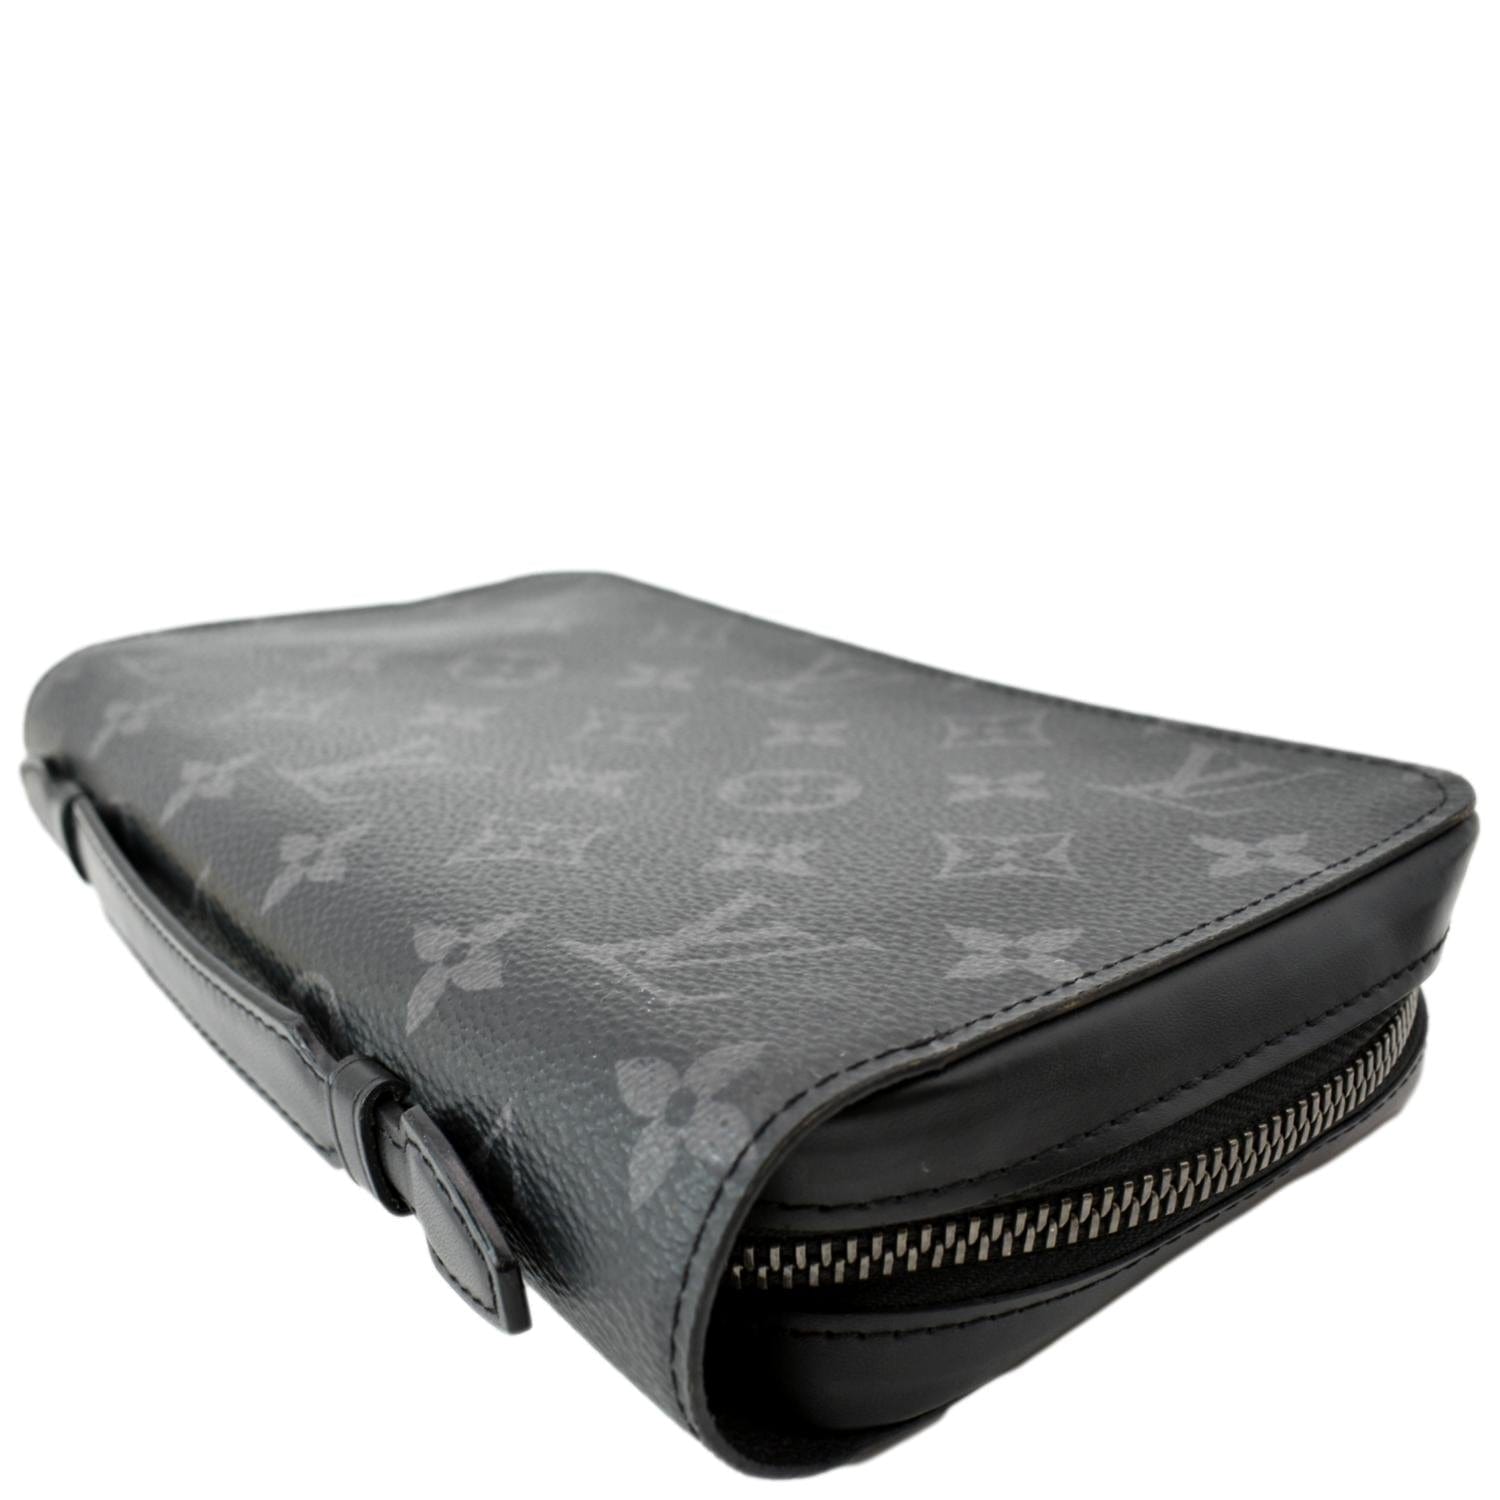 Zippy XL Wallet Monogram Eclipse - Wallets and Small Leather Goods